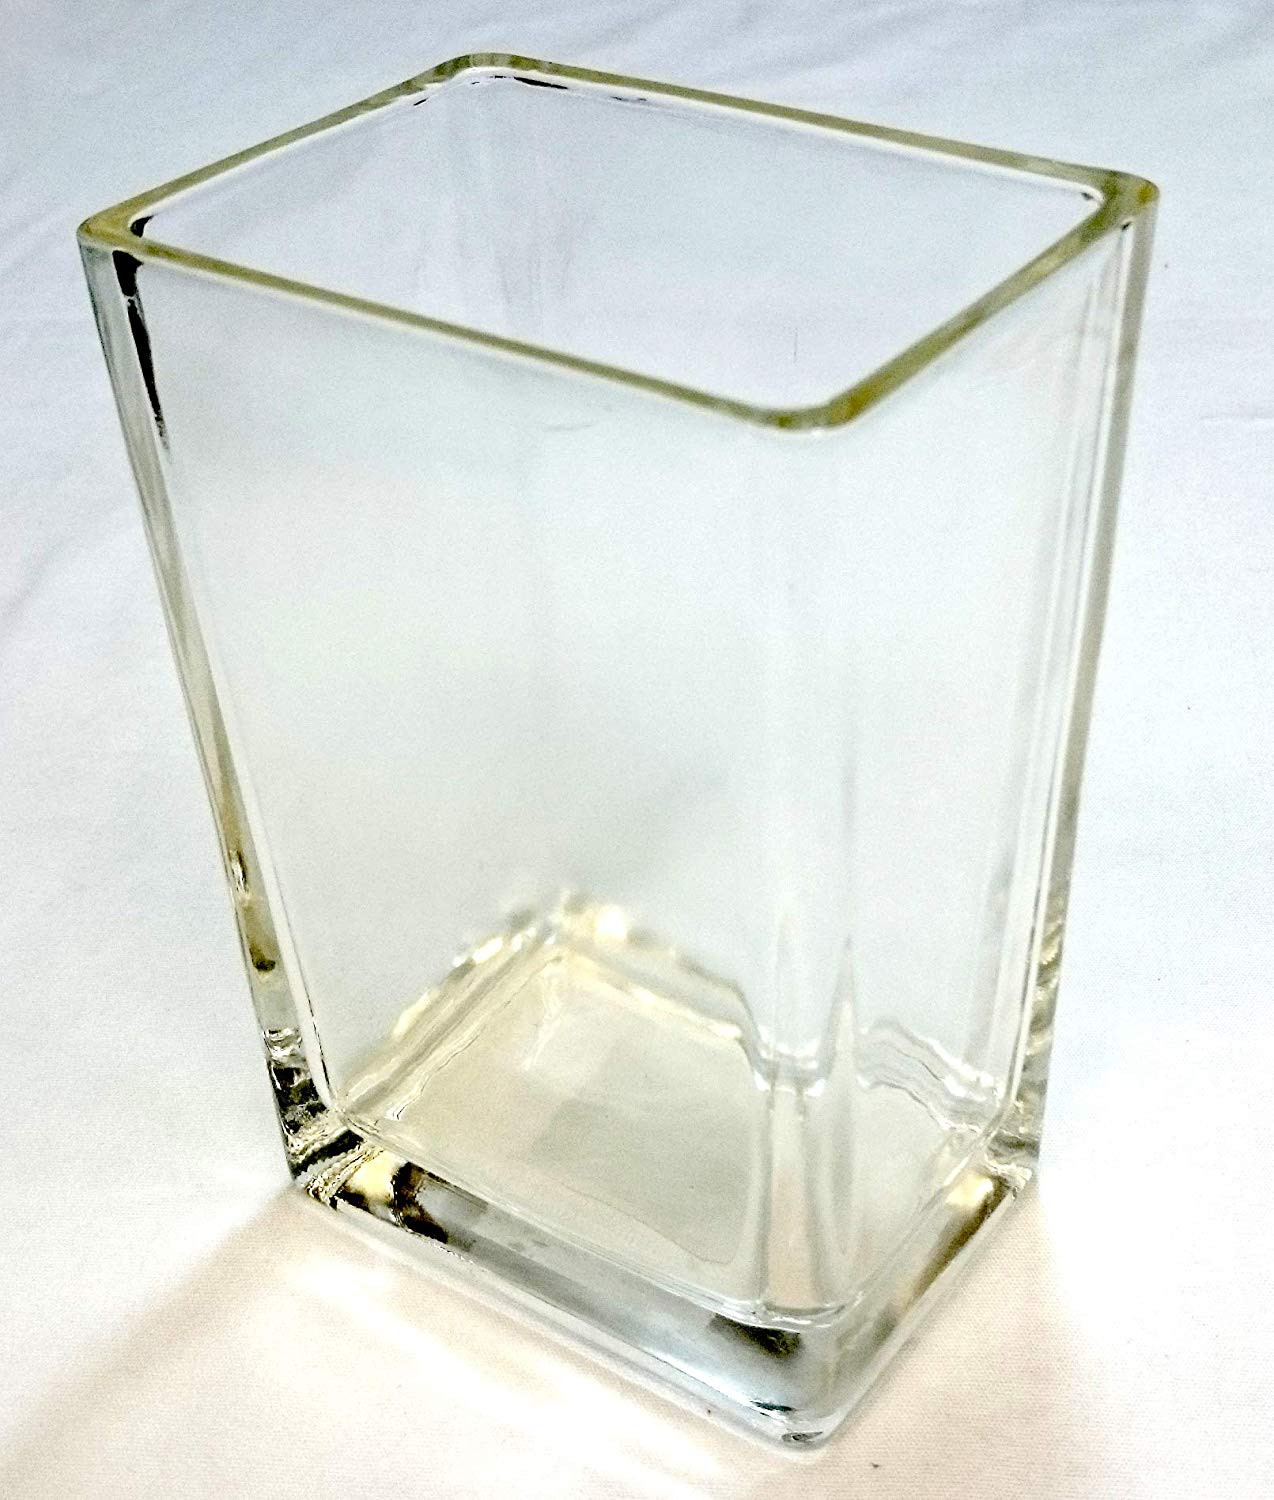 24 Amazing 8 Inch Glass Vase 2024 free download 8 inch glass vase of amazon com concord global trading 6 rectangle 3x4 base glass vase with regard to amazon com concord global trading 6 rectangle 3x4 base glass vase six inch high tapered 